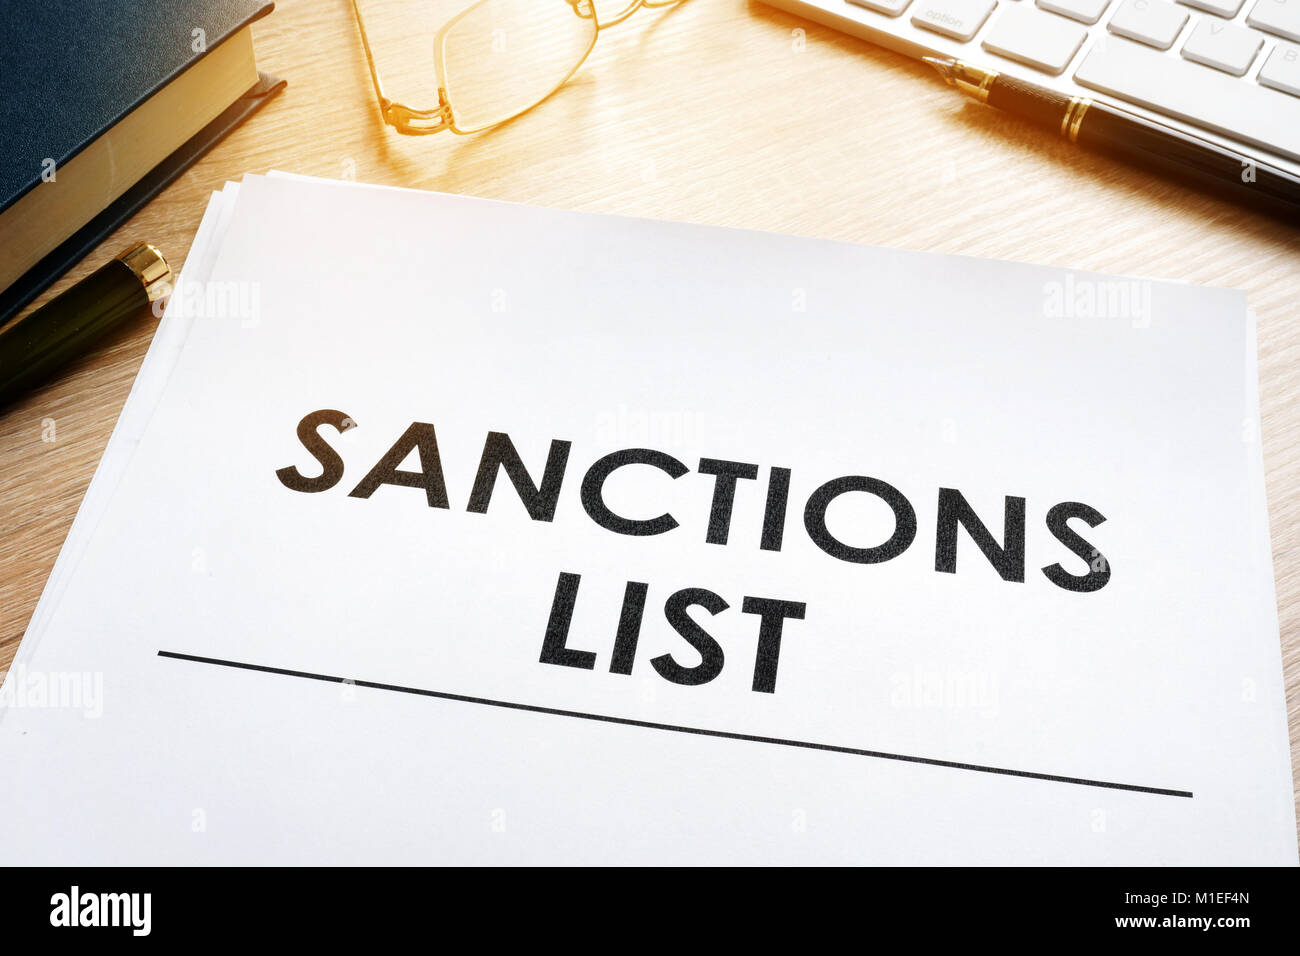 Sanctions list on a desk. Government act for sanctioned countries concept. Stock Photo